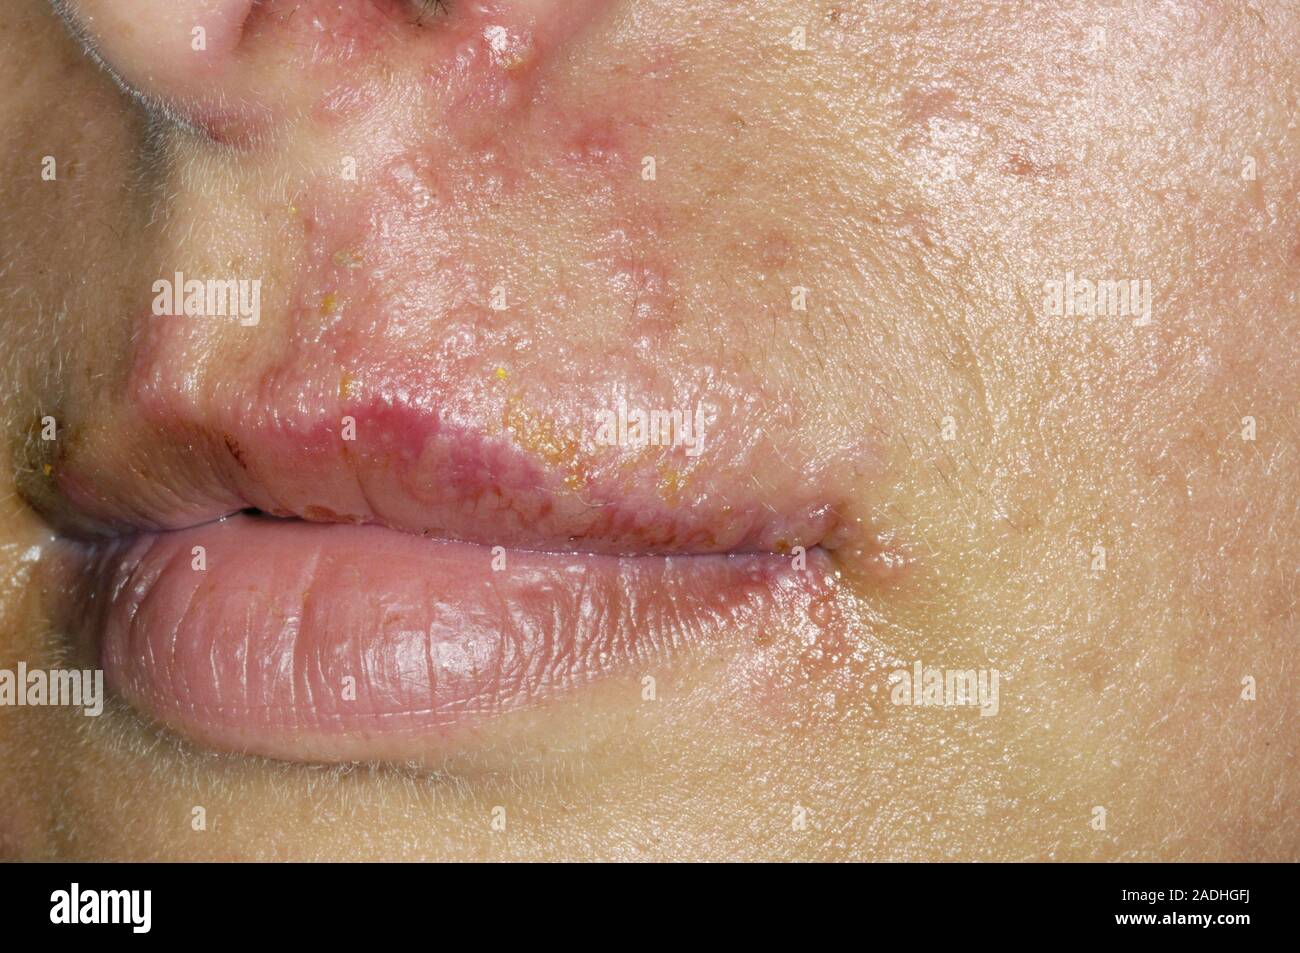 Cold Sores On The Upper Lip Of A 28 Year Old Woman Cold Sores Are